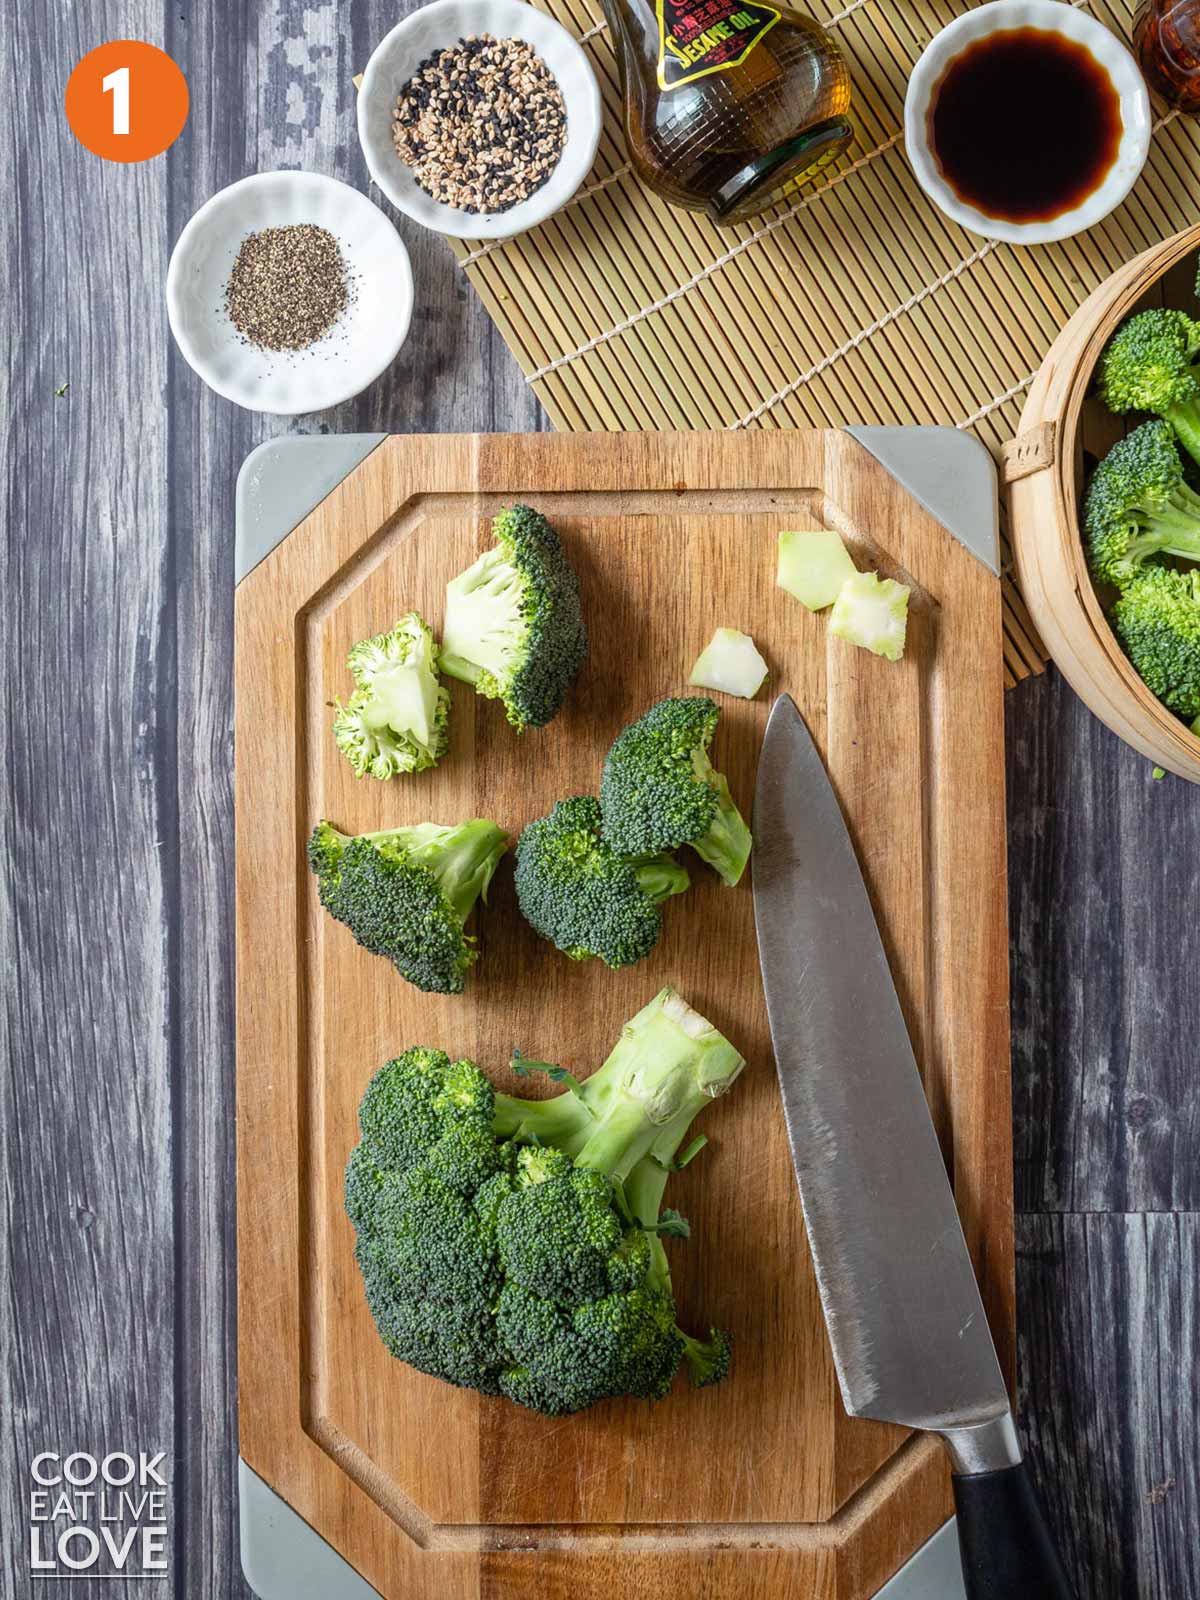 Broccoli florets chopped into small pieces on a cutting board with a knife.